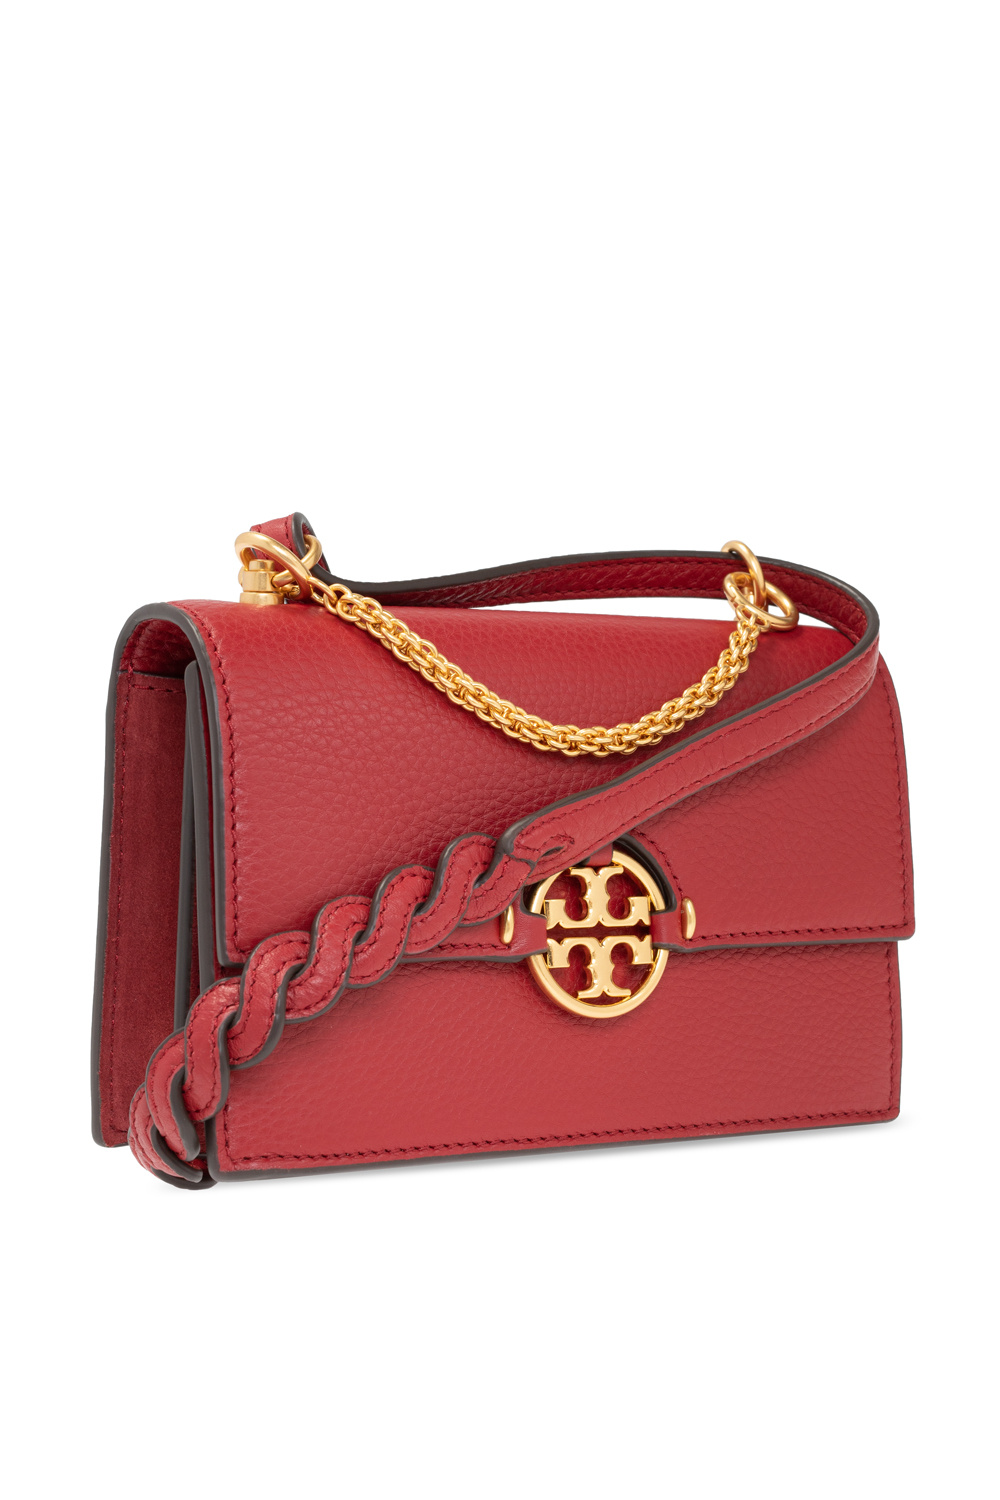 Women's Bags | Tory Burch 'Miller Mini' shoulder bag | StclaircomoShops |  Get a bag from a fashion brand with a history of making luggage Louis  Vuitton